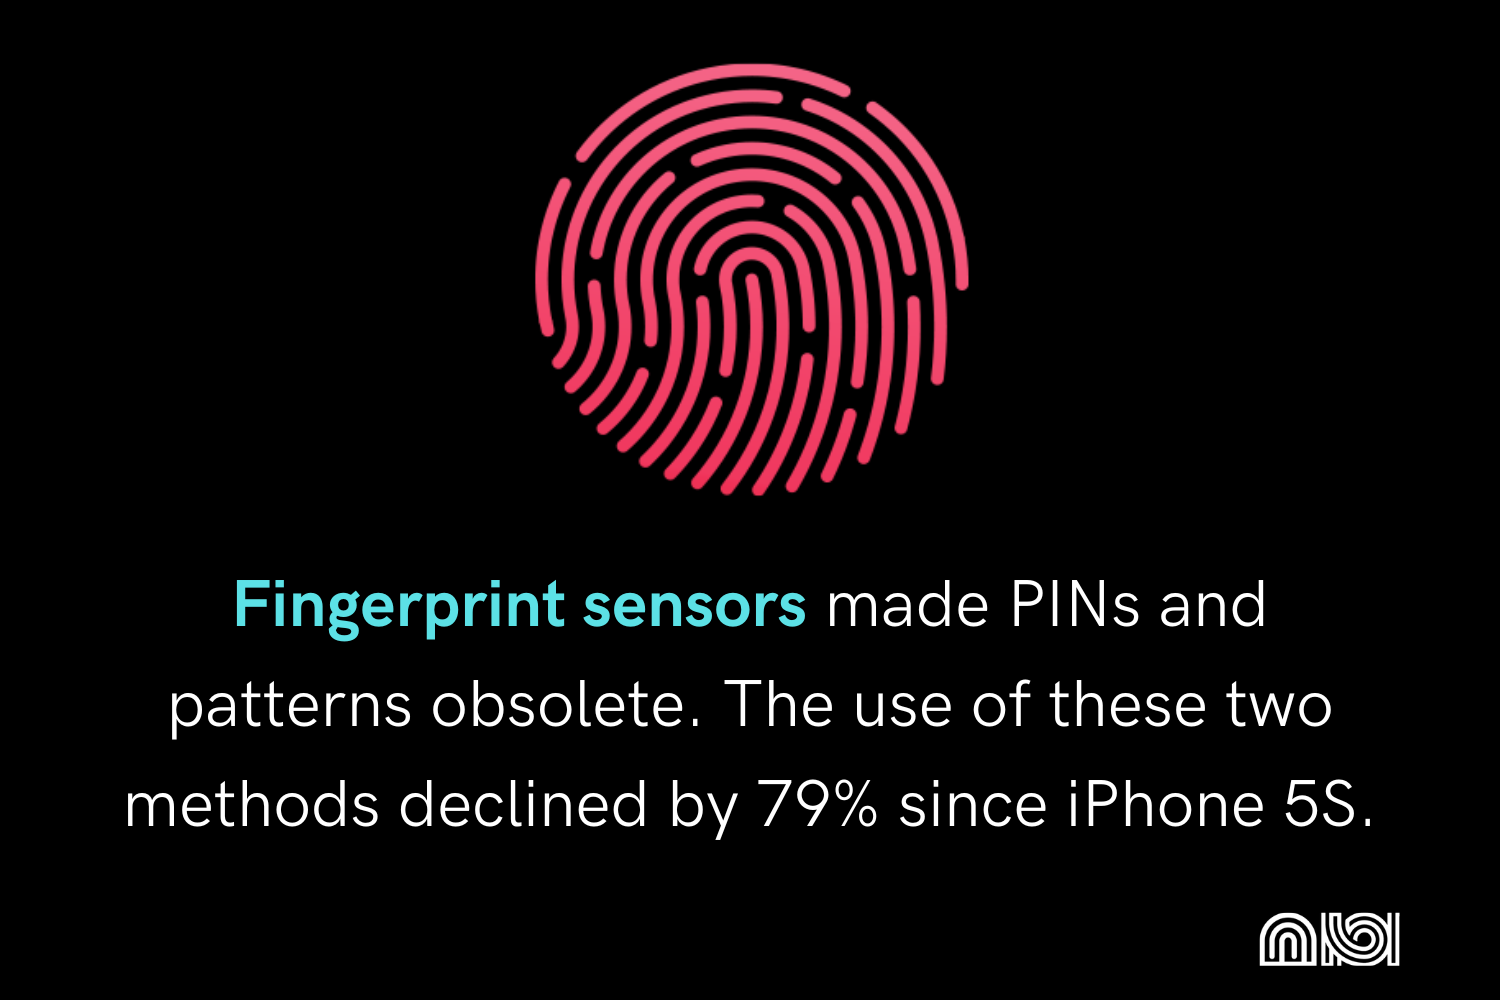 A graph showing the decline in the use of PINs and patterns to unlock smartphones since the launch of the iPhone 5S, which had a fingerprint sensor.